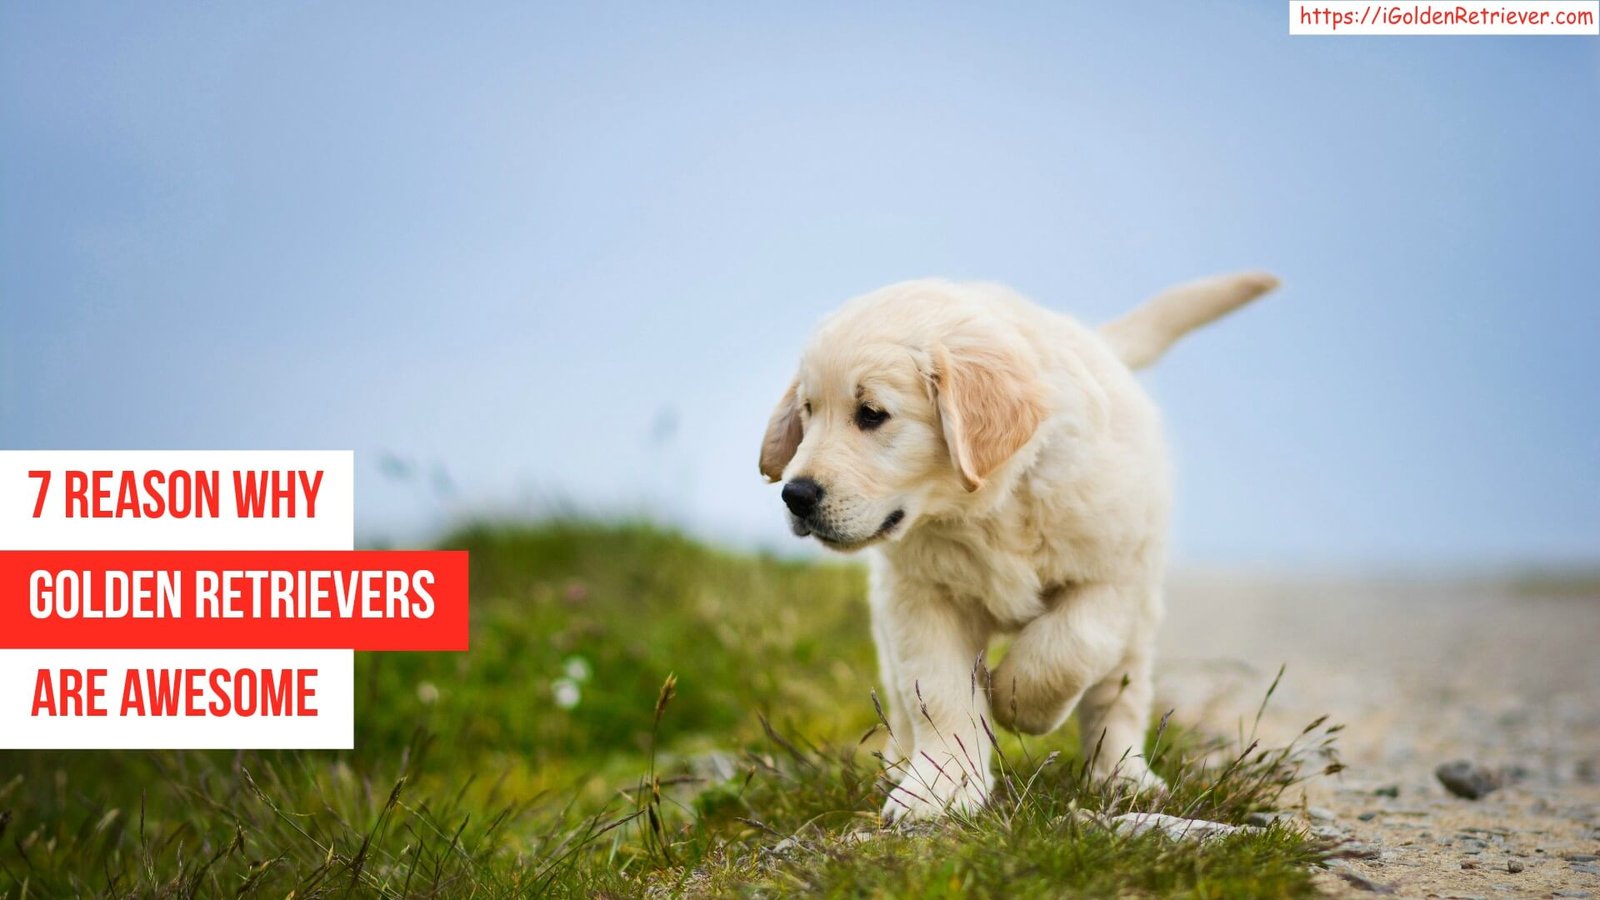 7 Reasons Why Golden Retrievers are Awesome Pets